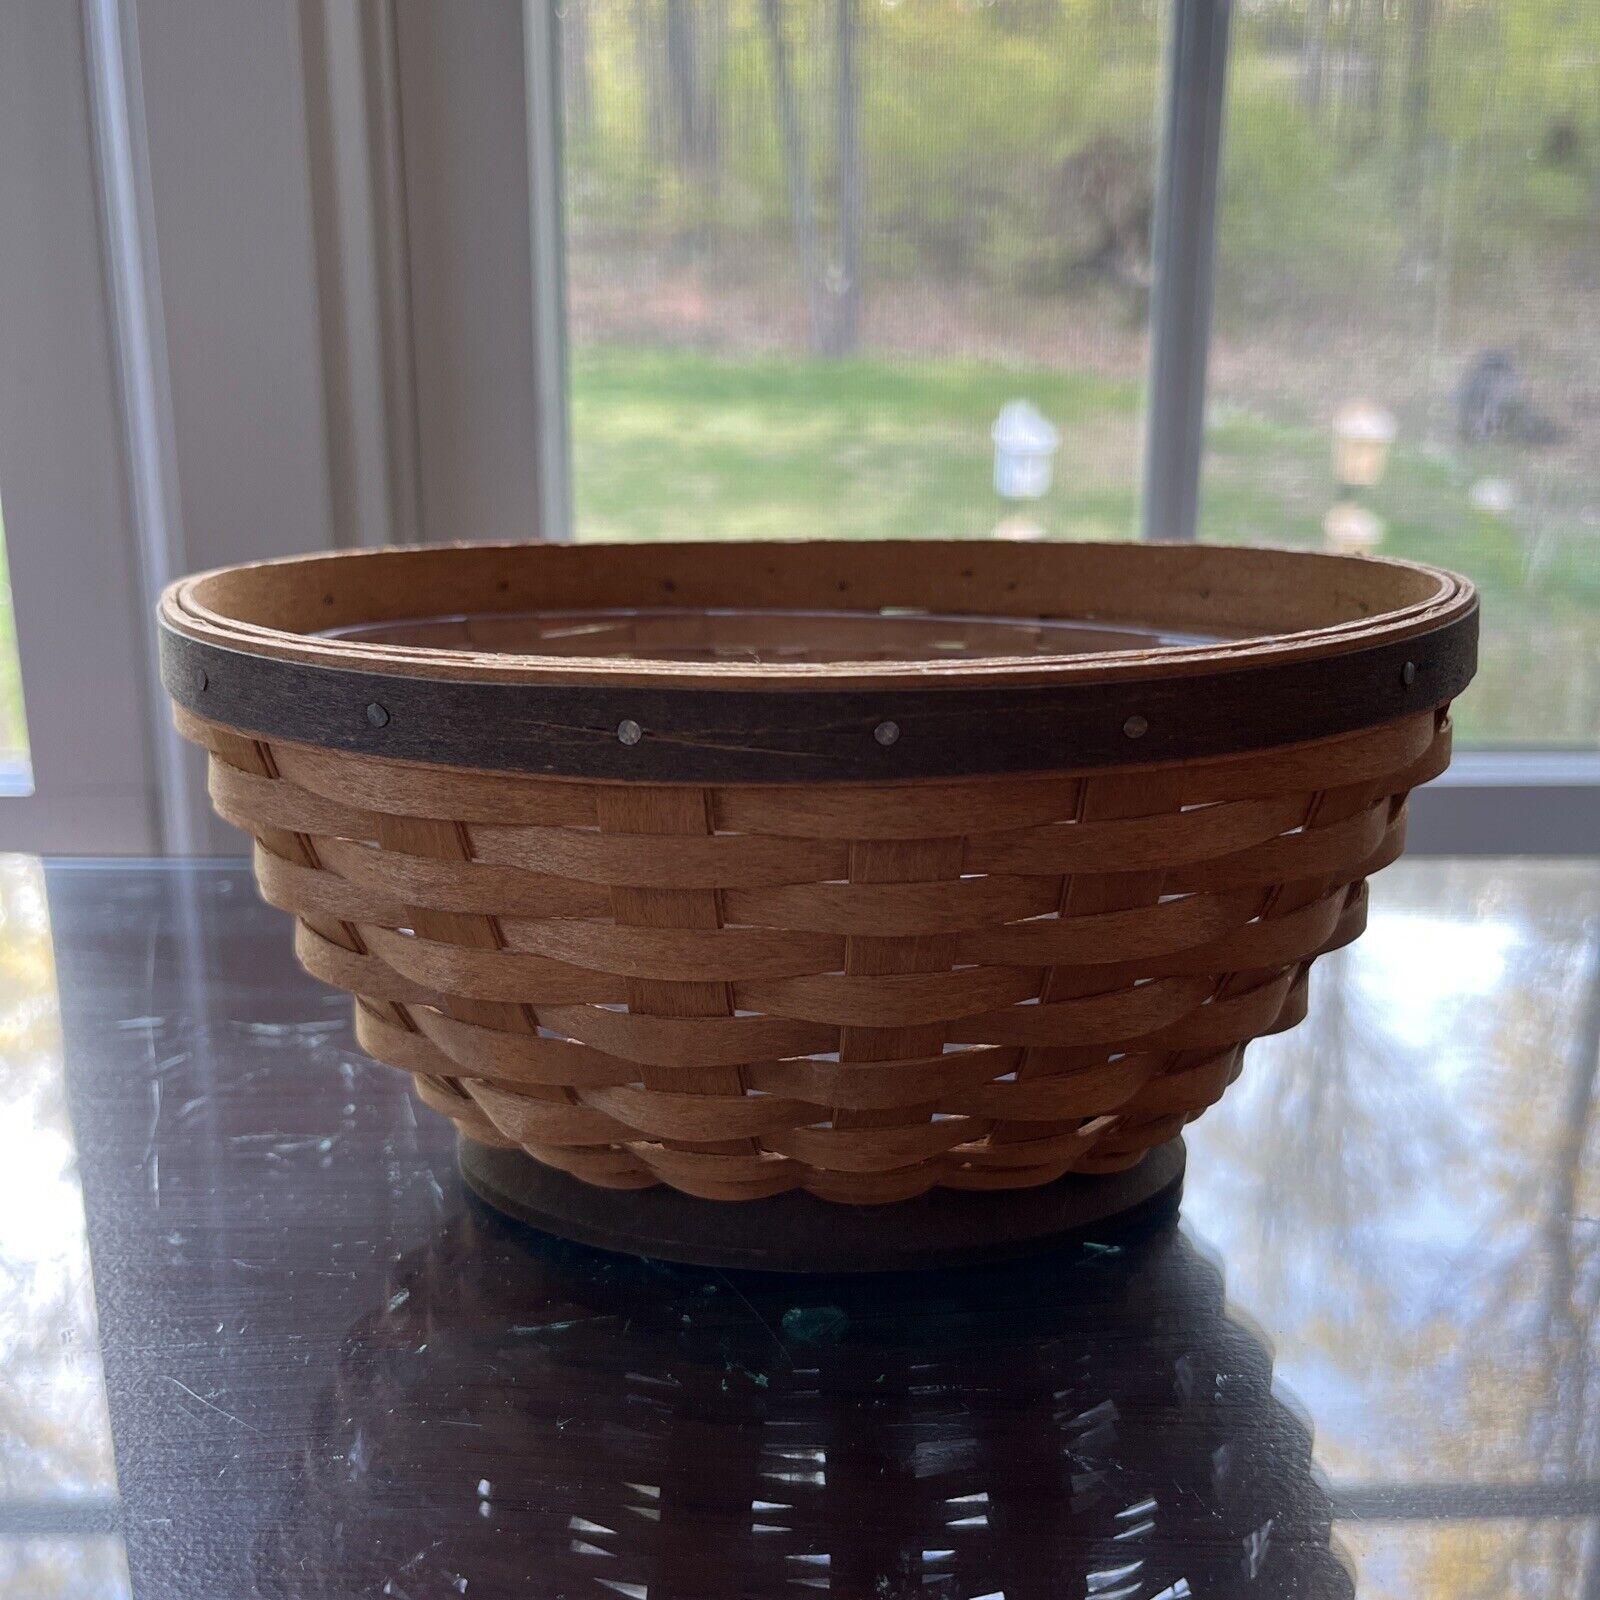 Vintg 2008 Longaberger small oval basket 3 3/4 Inches high. 7 1/4 by 5 Inches...